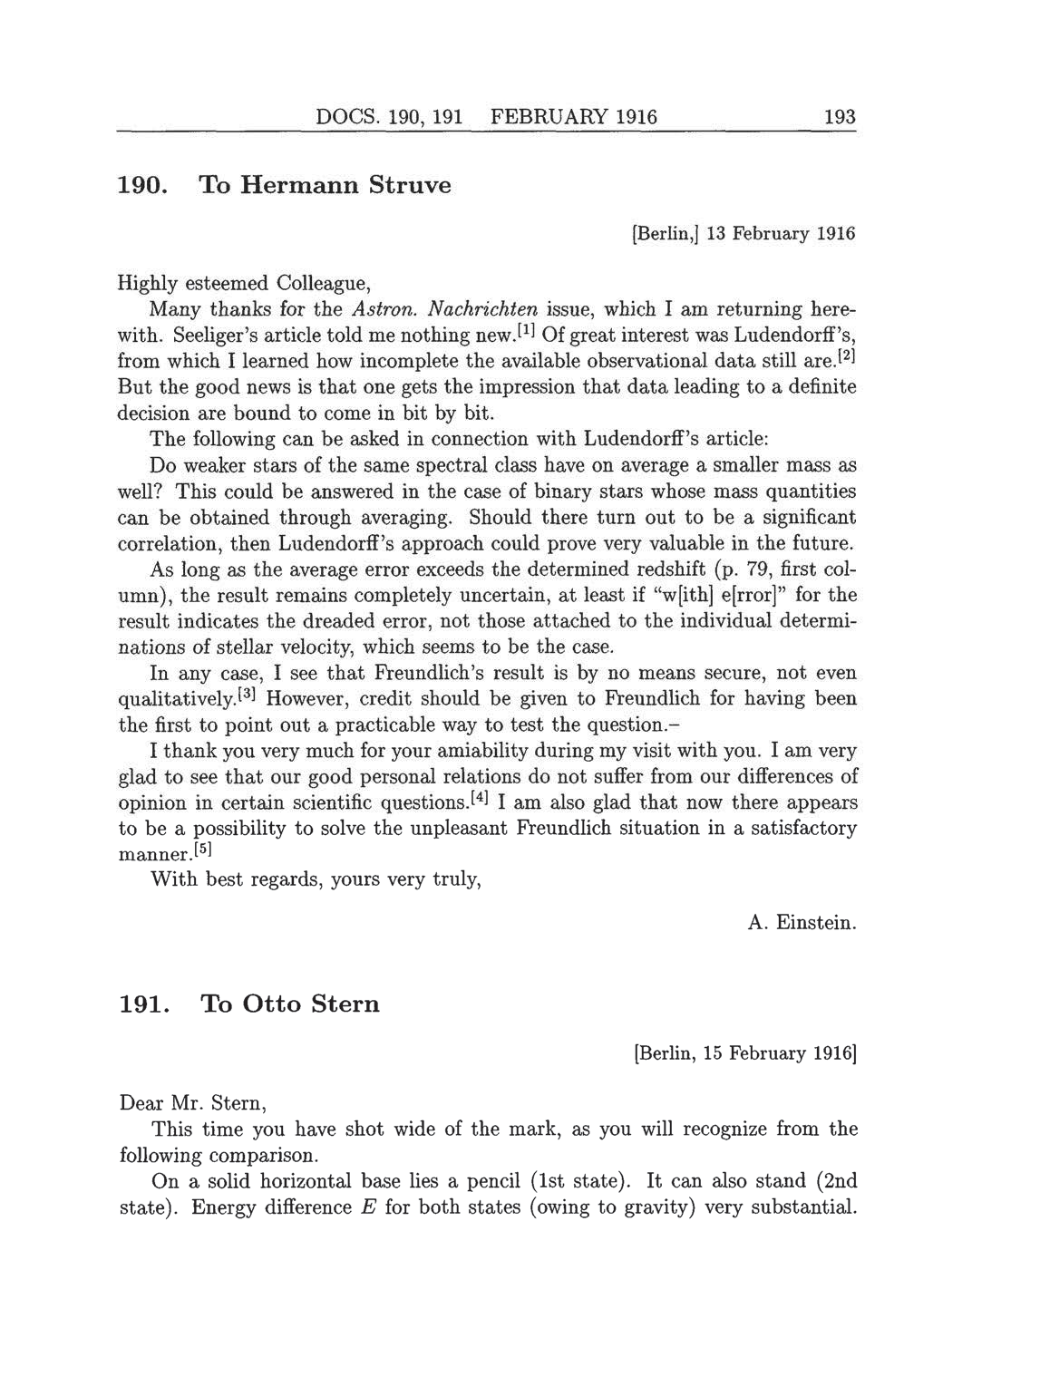 Volume 8: The Berlin Years: Correspondence, 1914-1918 (English translation supplement) page 193